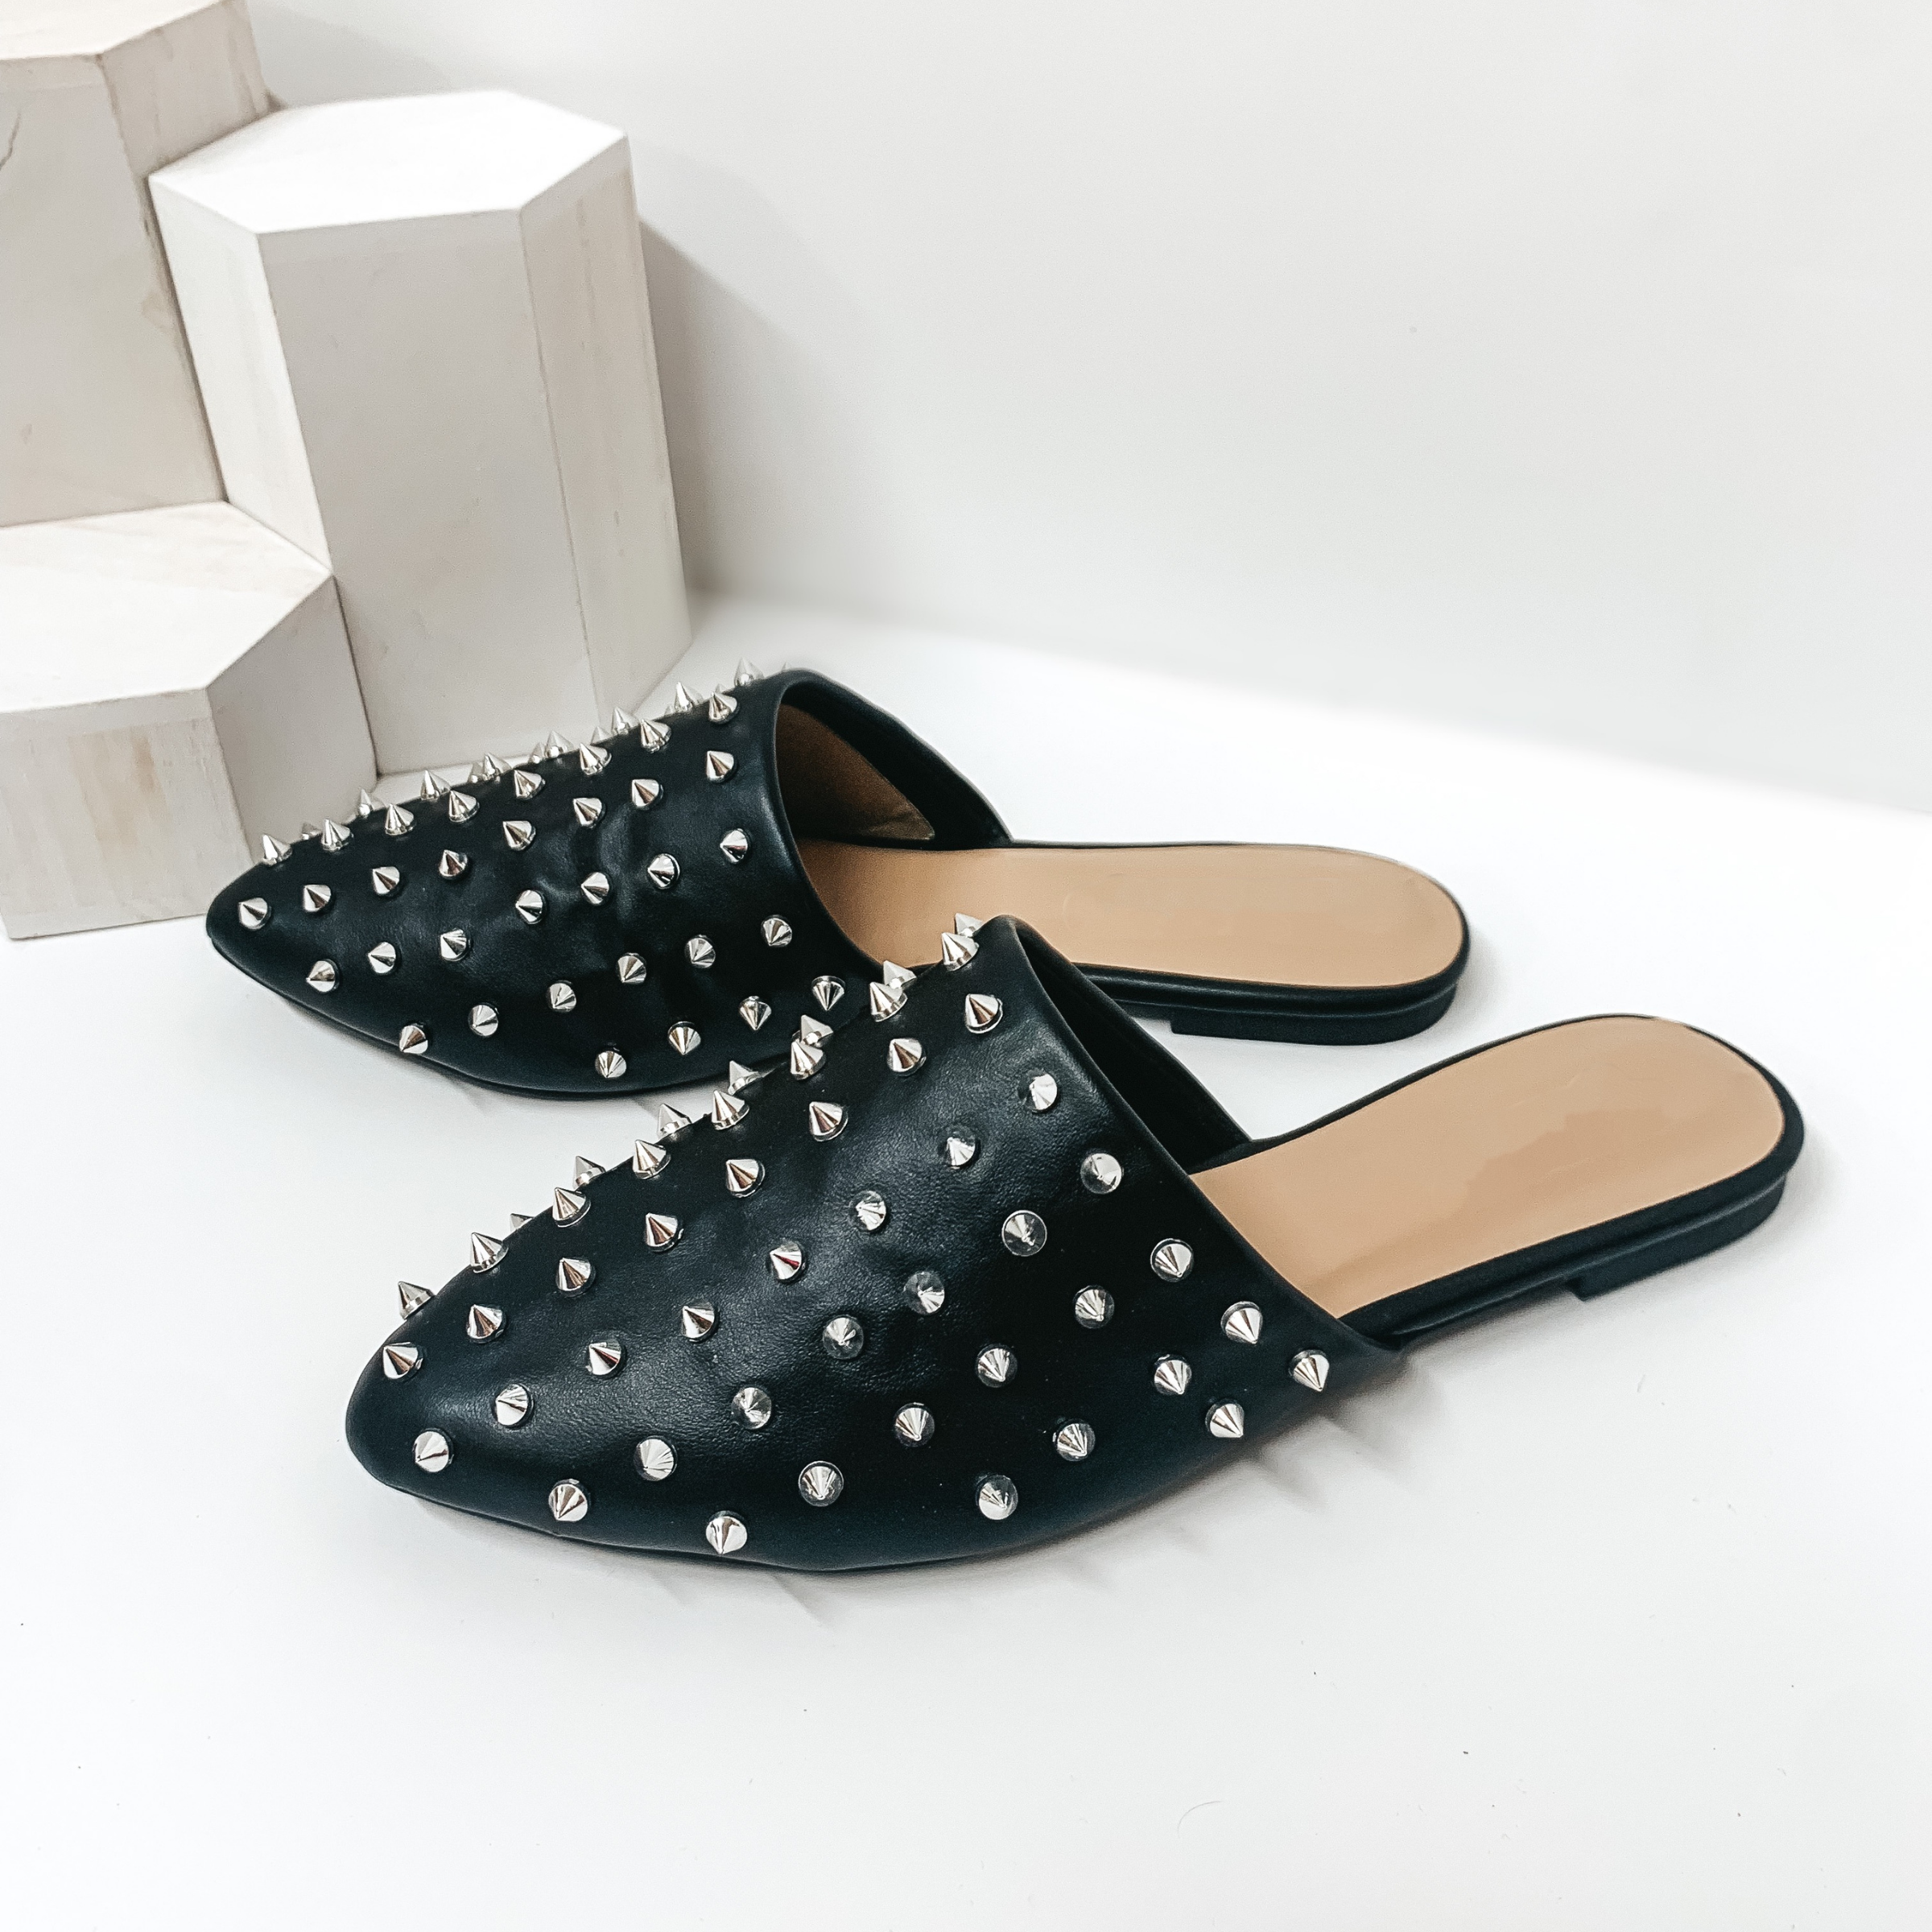 Uptown Girl Silver Spiked Slide On Mules in Black - Giddy Up Glamour Boutique